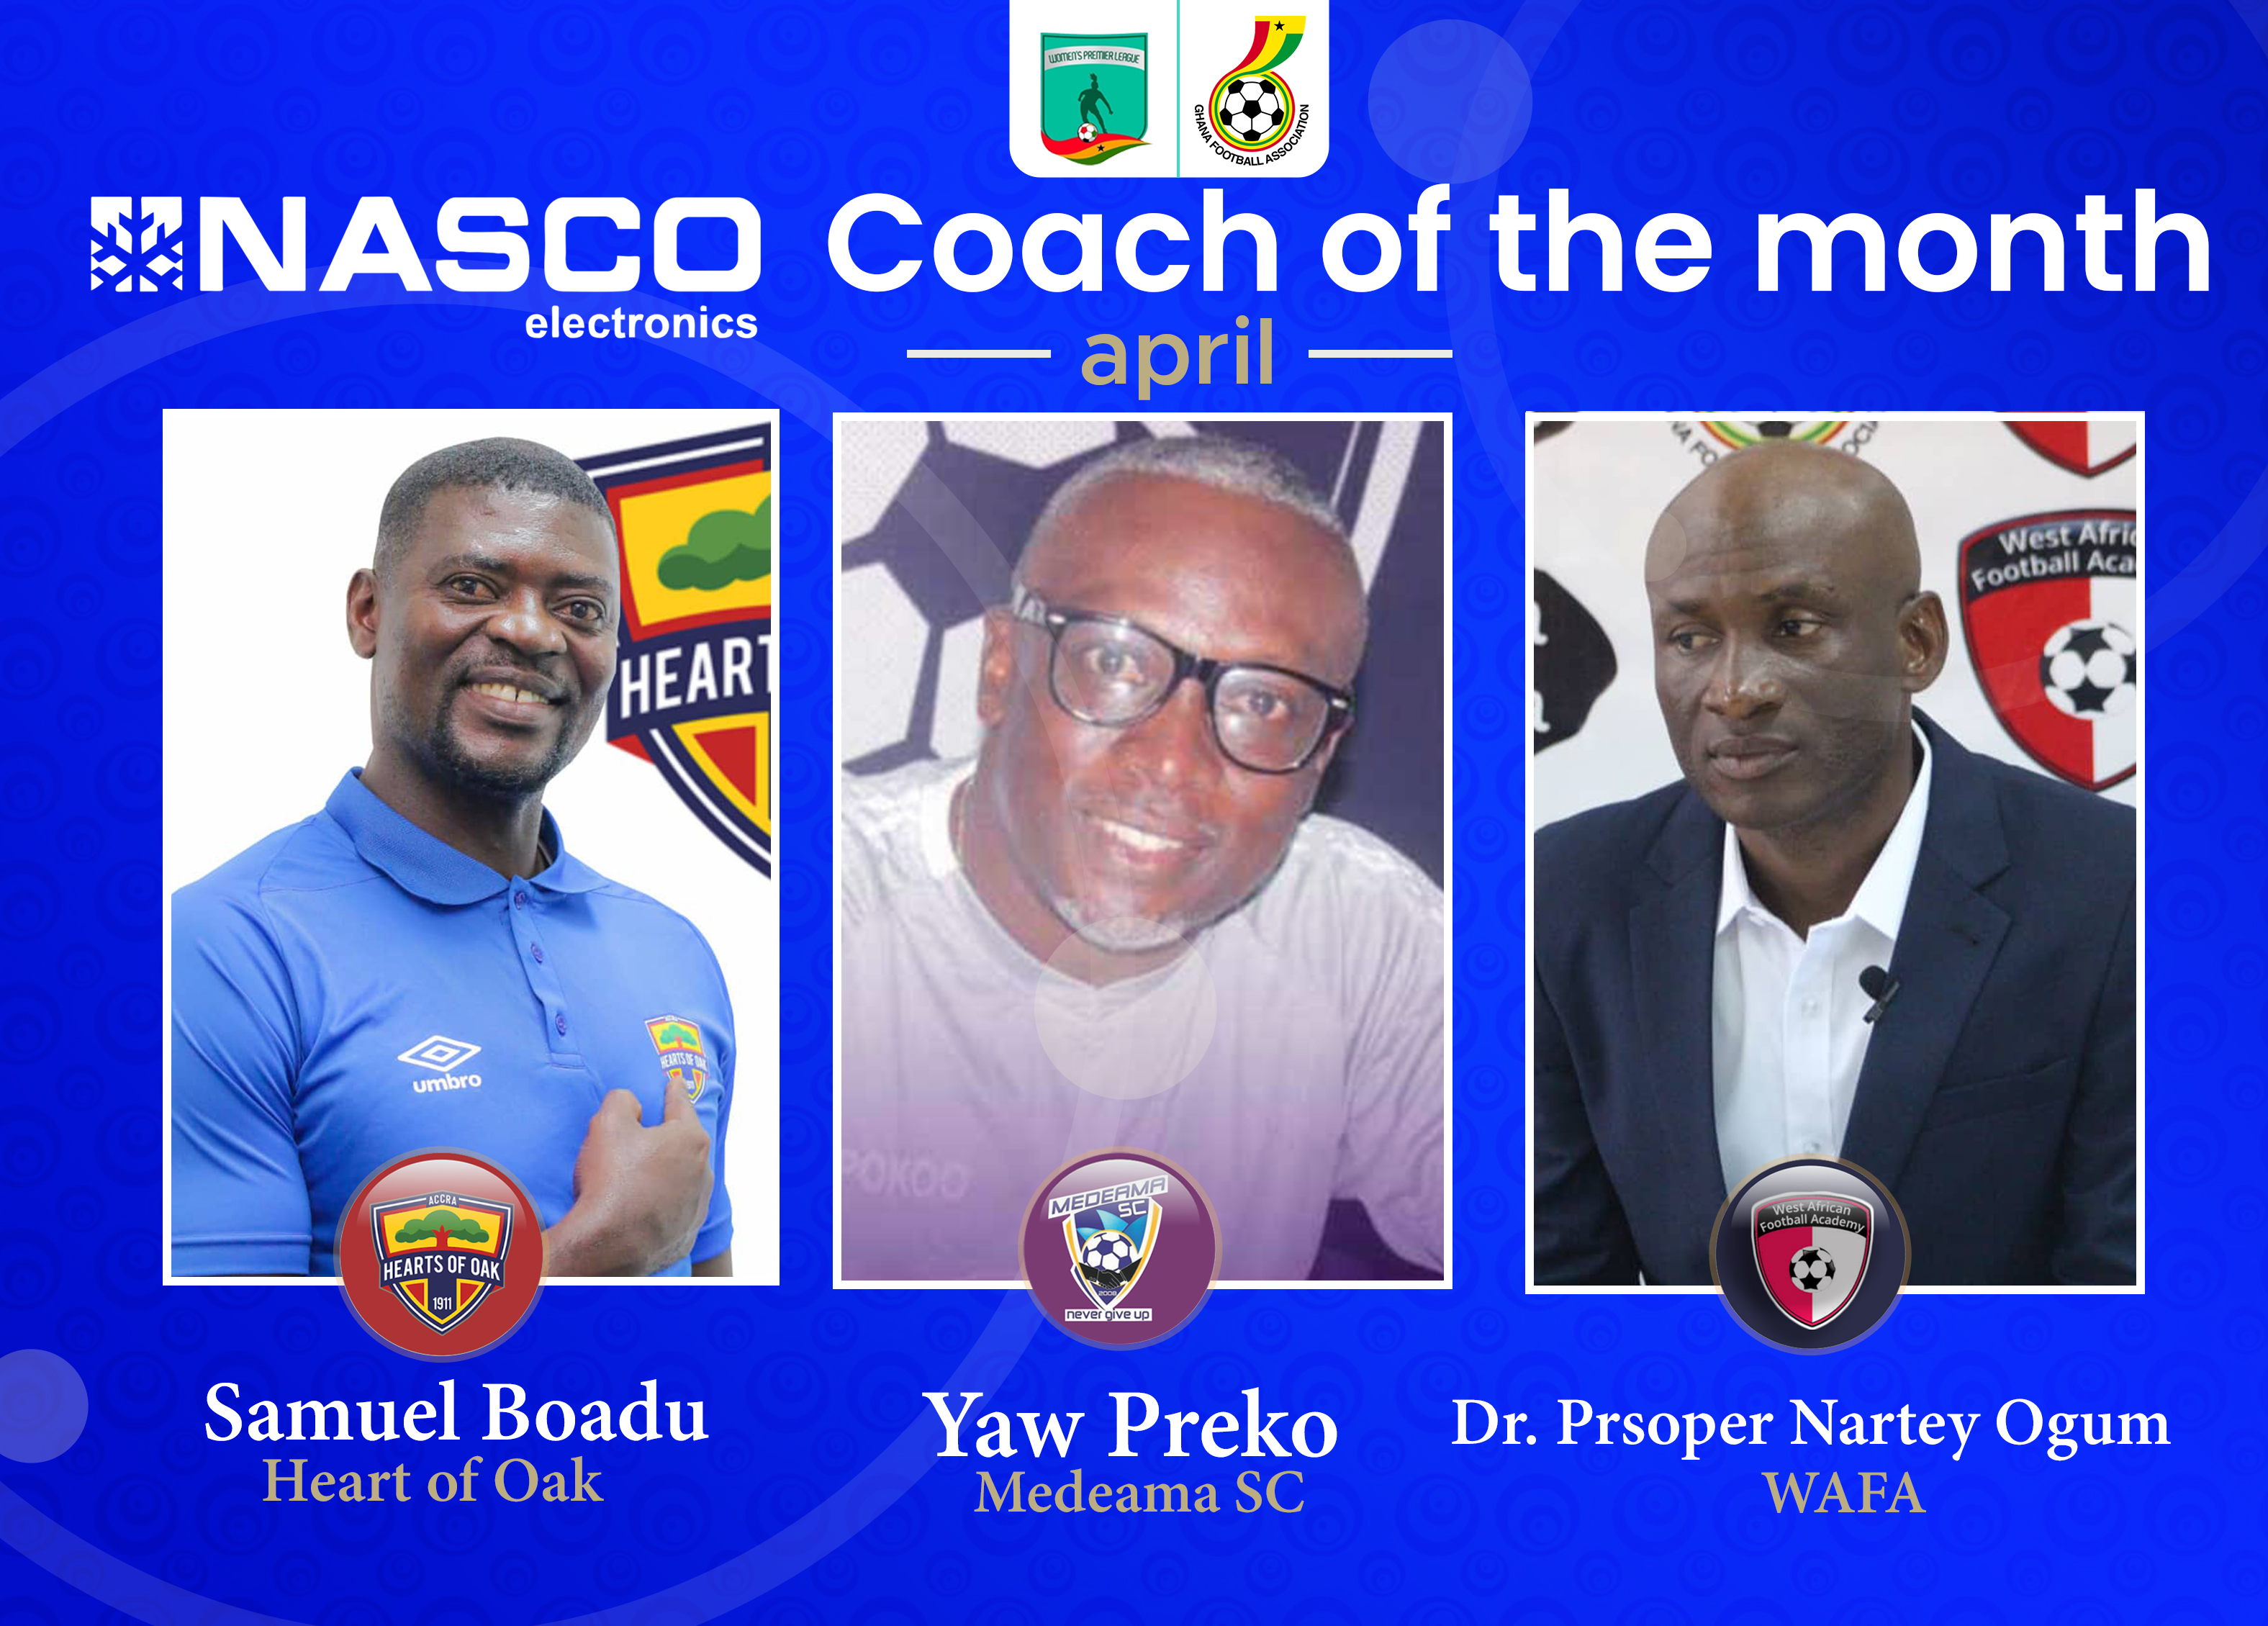 Nominees for NASCO Coach of the Month - April